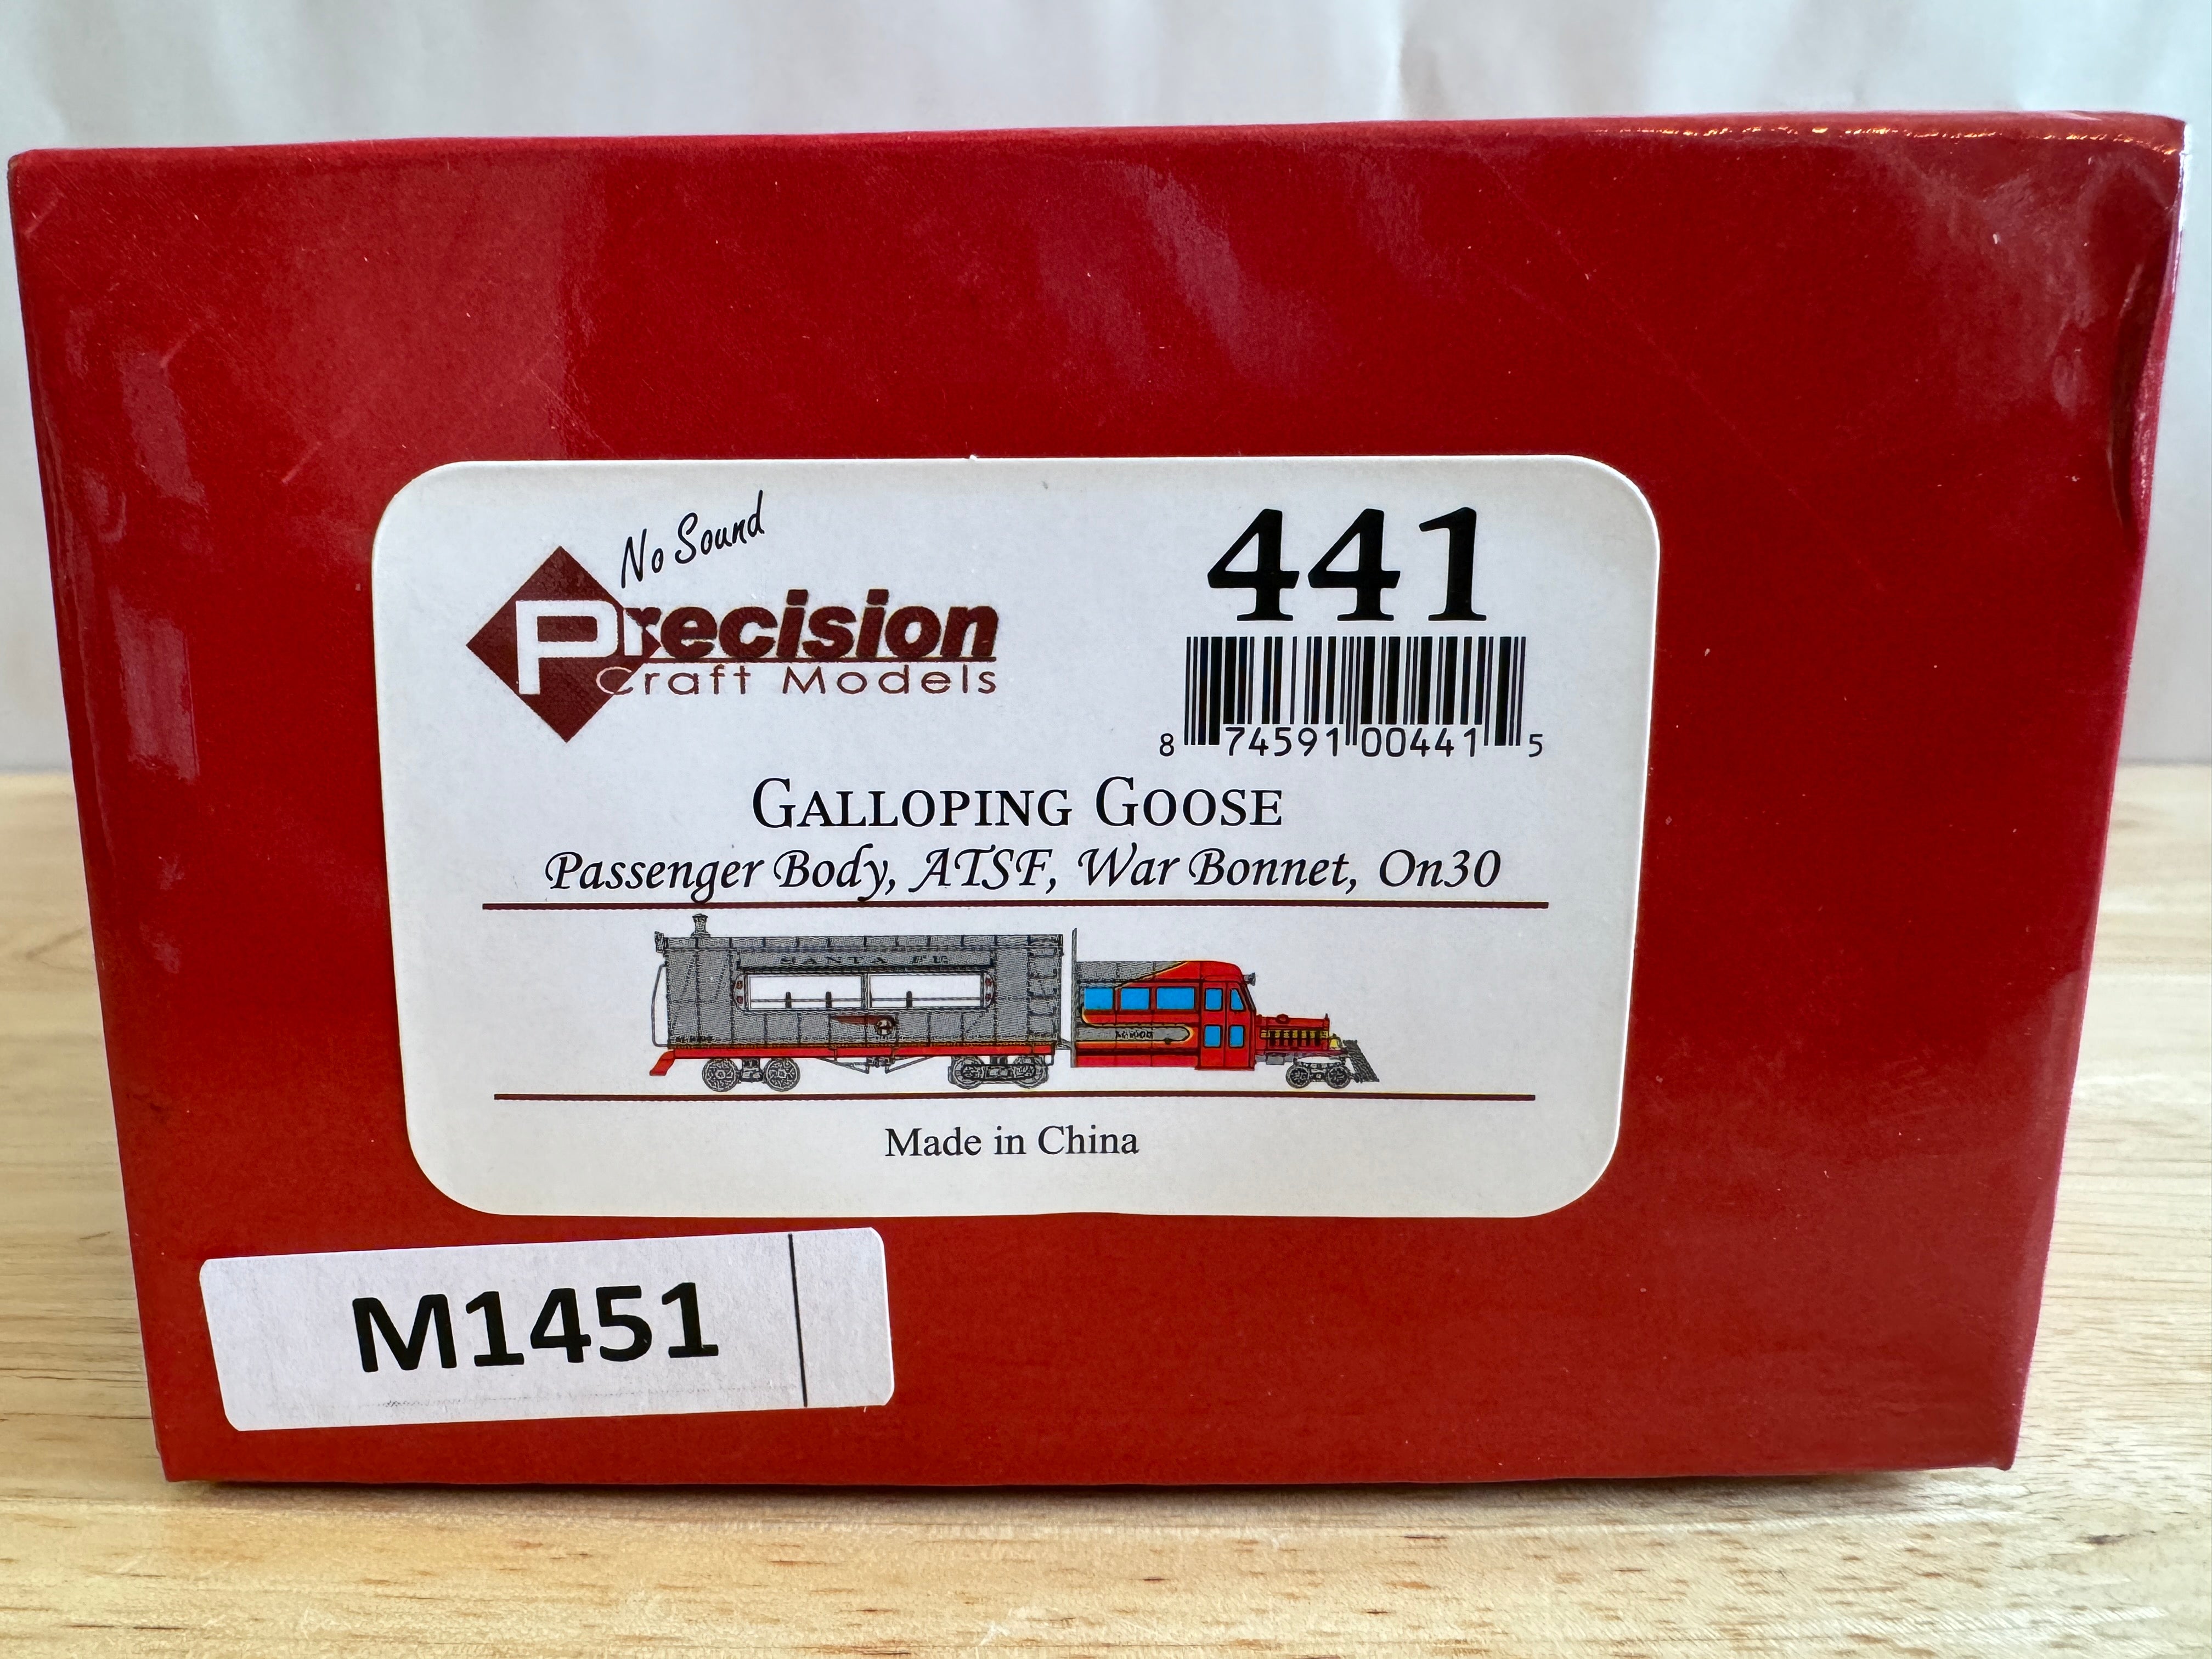 Precision Craft Models 441 HO Scale "ATSF" War Bonnet, Galloping Goose #M-1000-Second hand-M1451